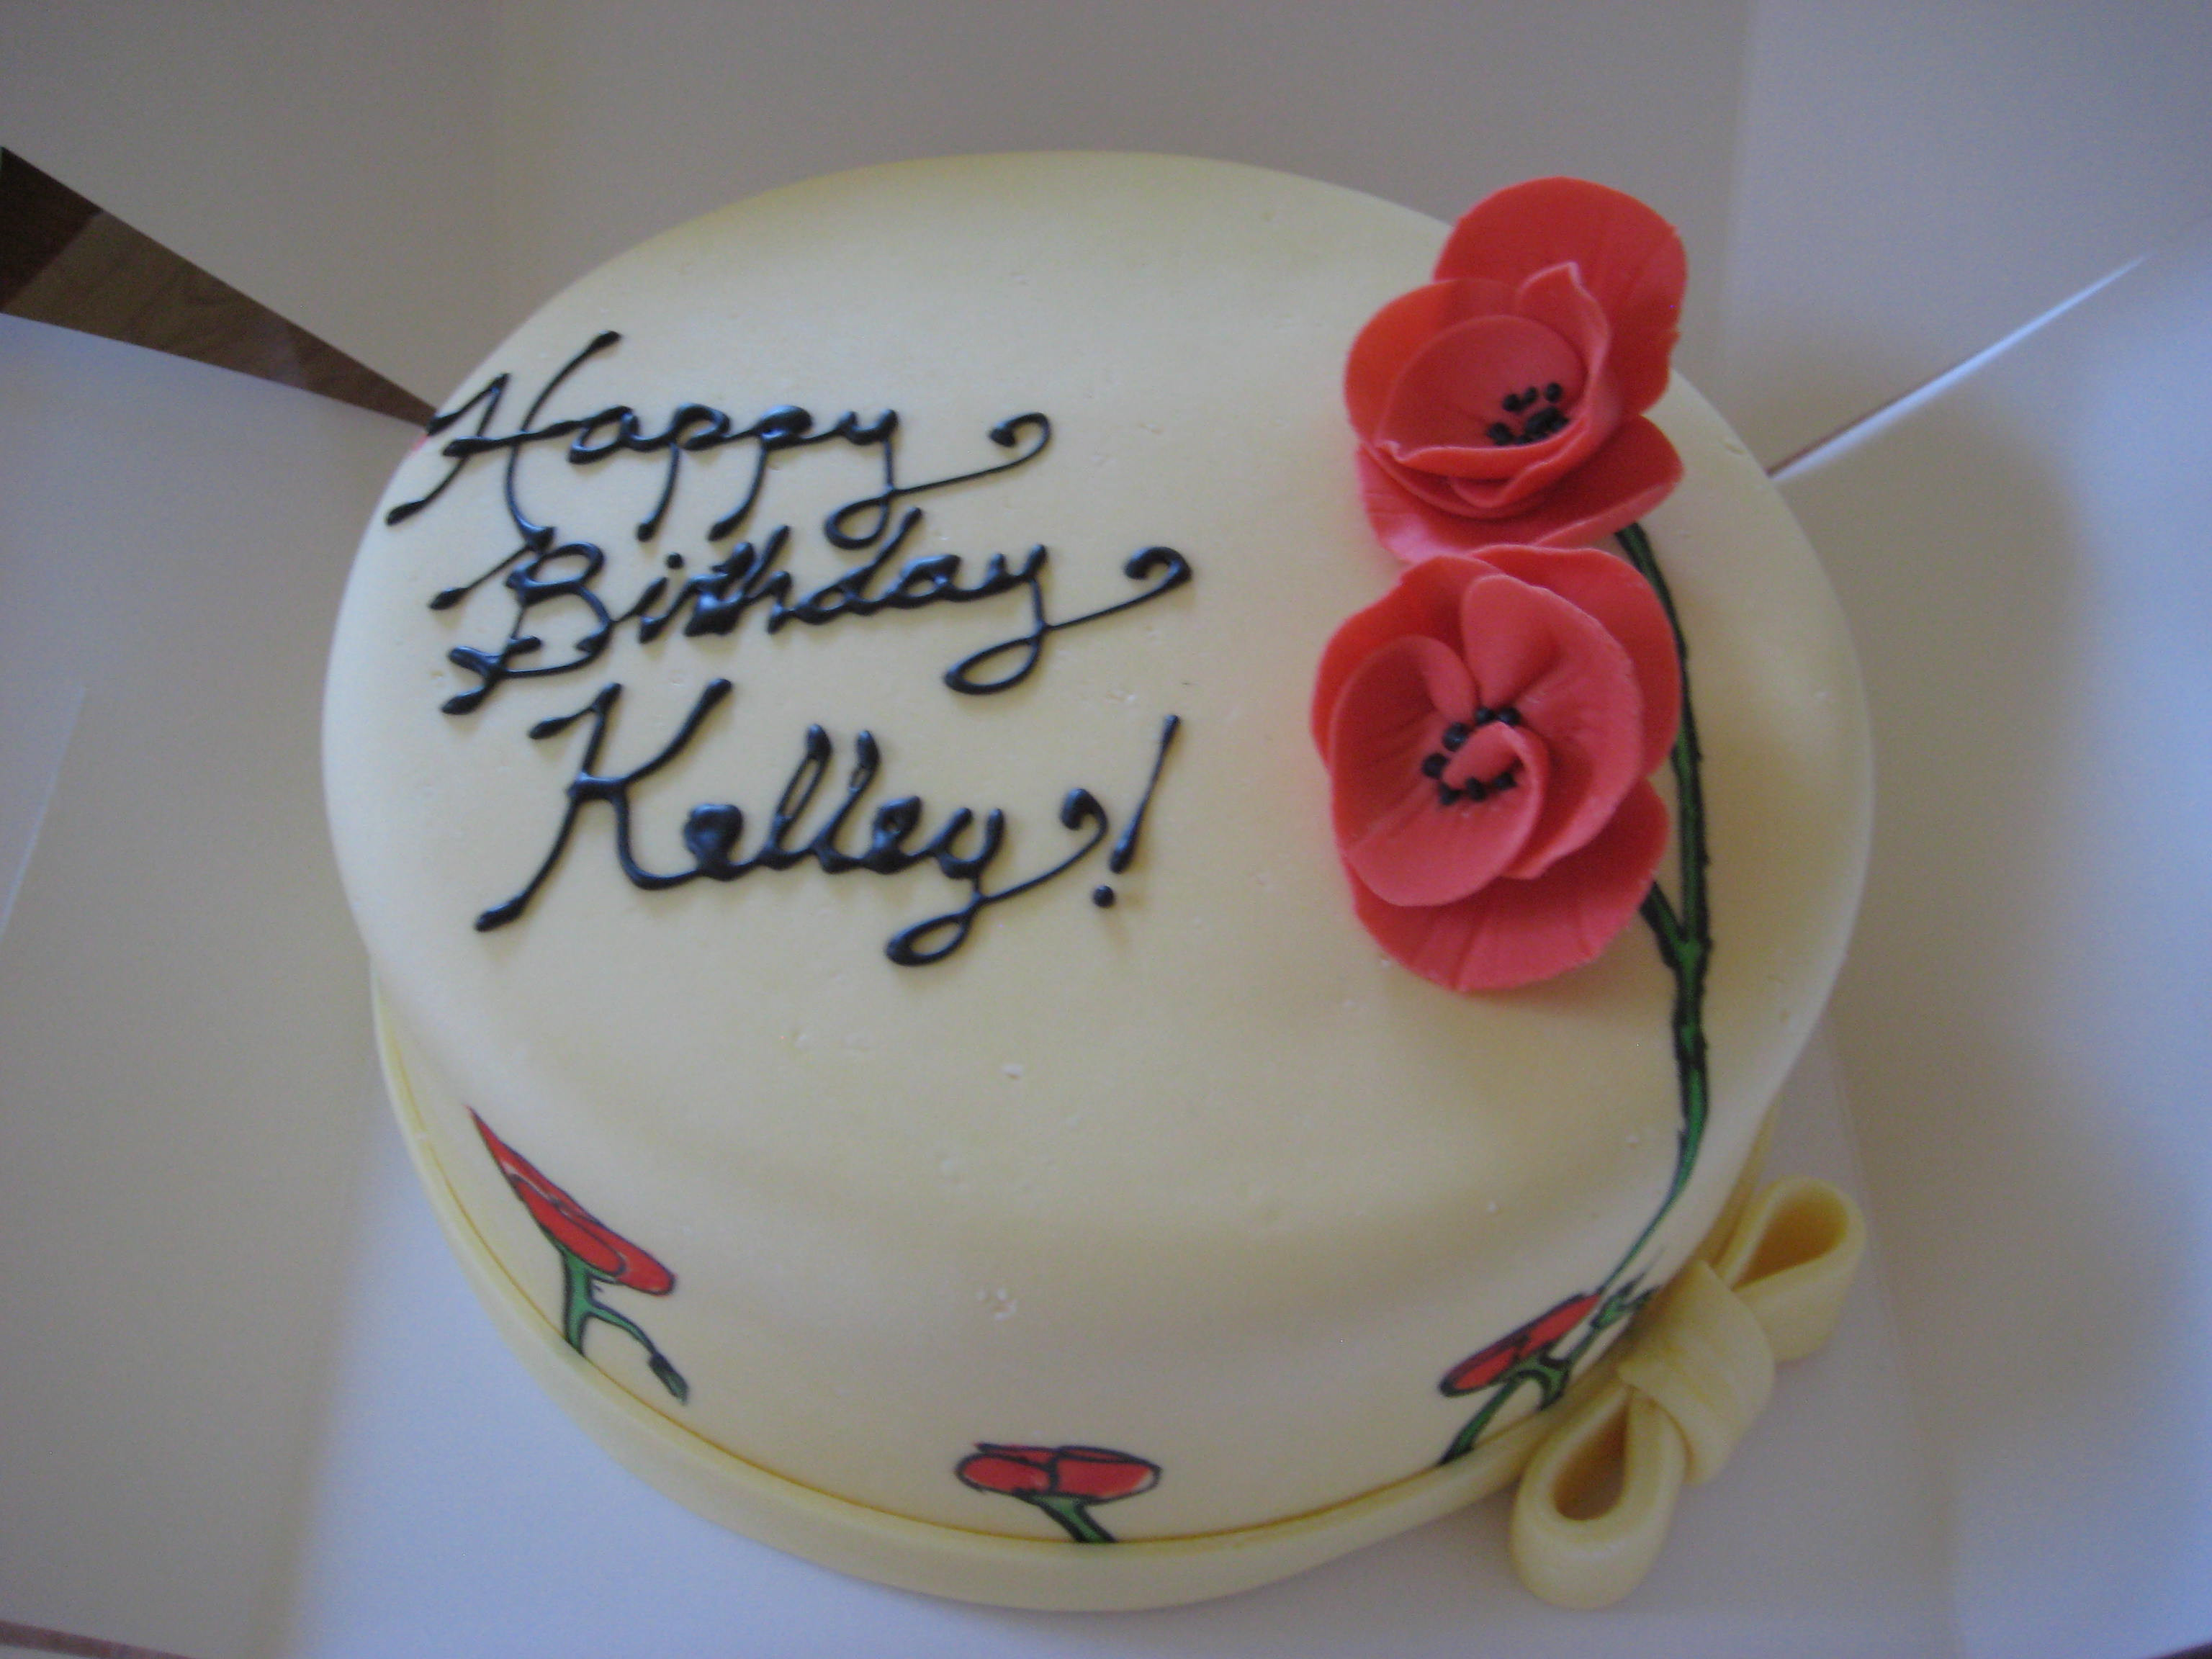 Happy Birthday Kelly Cake
 Late Post and Another Happy Birthday